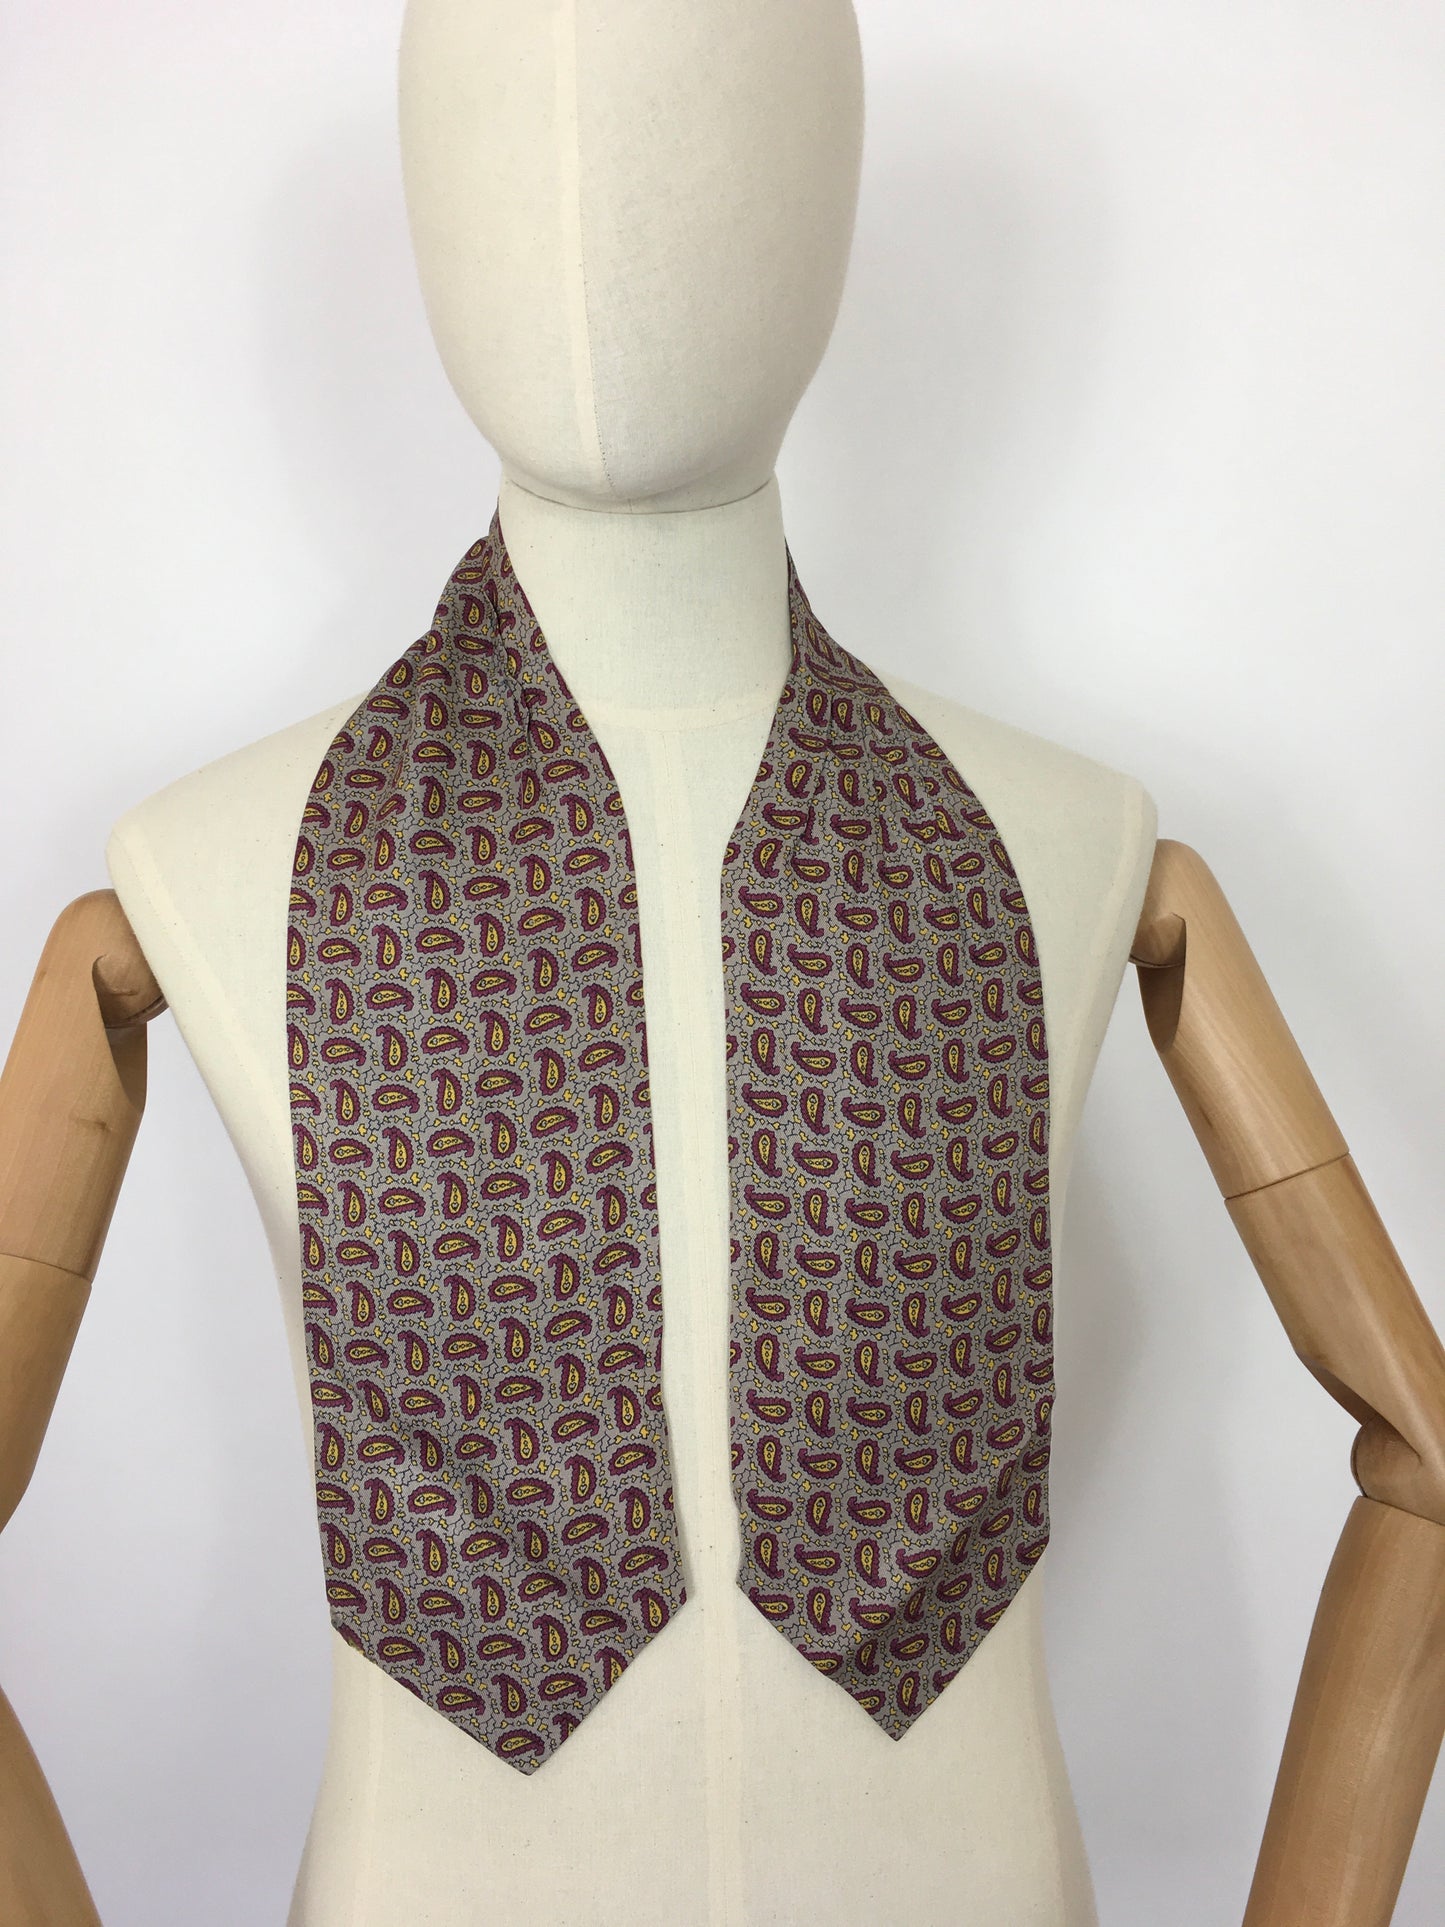 Original 1940’s Mens ‘ Sammy ‘ Silk Cravat - In a Lovely Bright Yellow and Burgundy Paisley